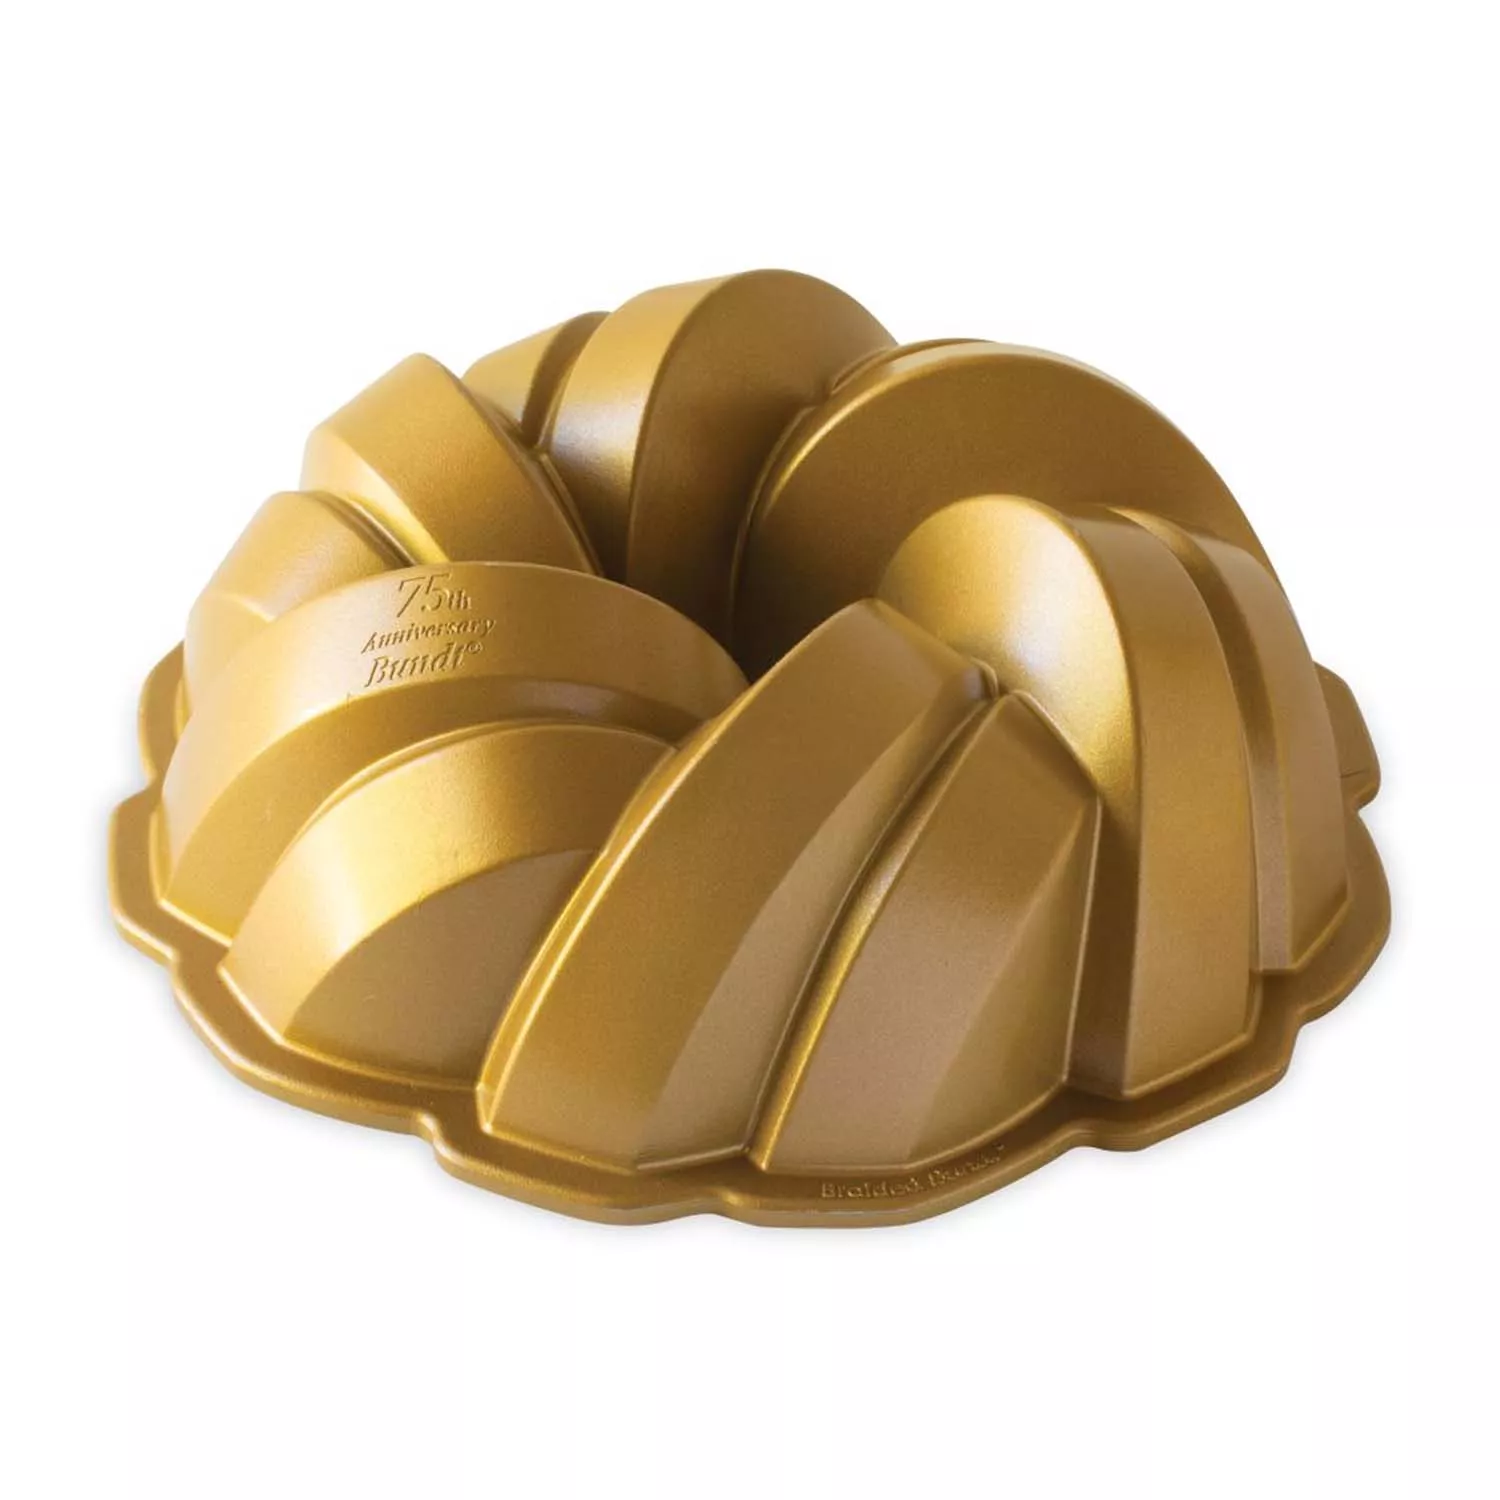 Nordic Ware 75th Anniversary Braided Bundt® Pan, 12 Cups